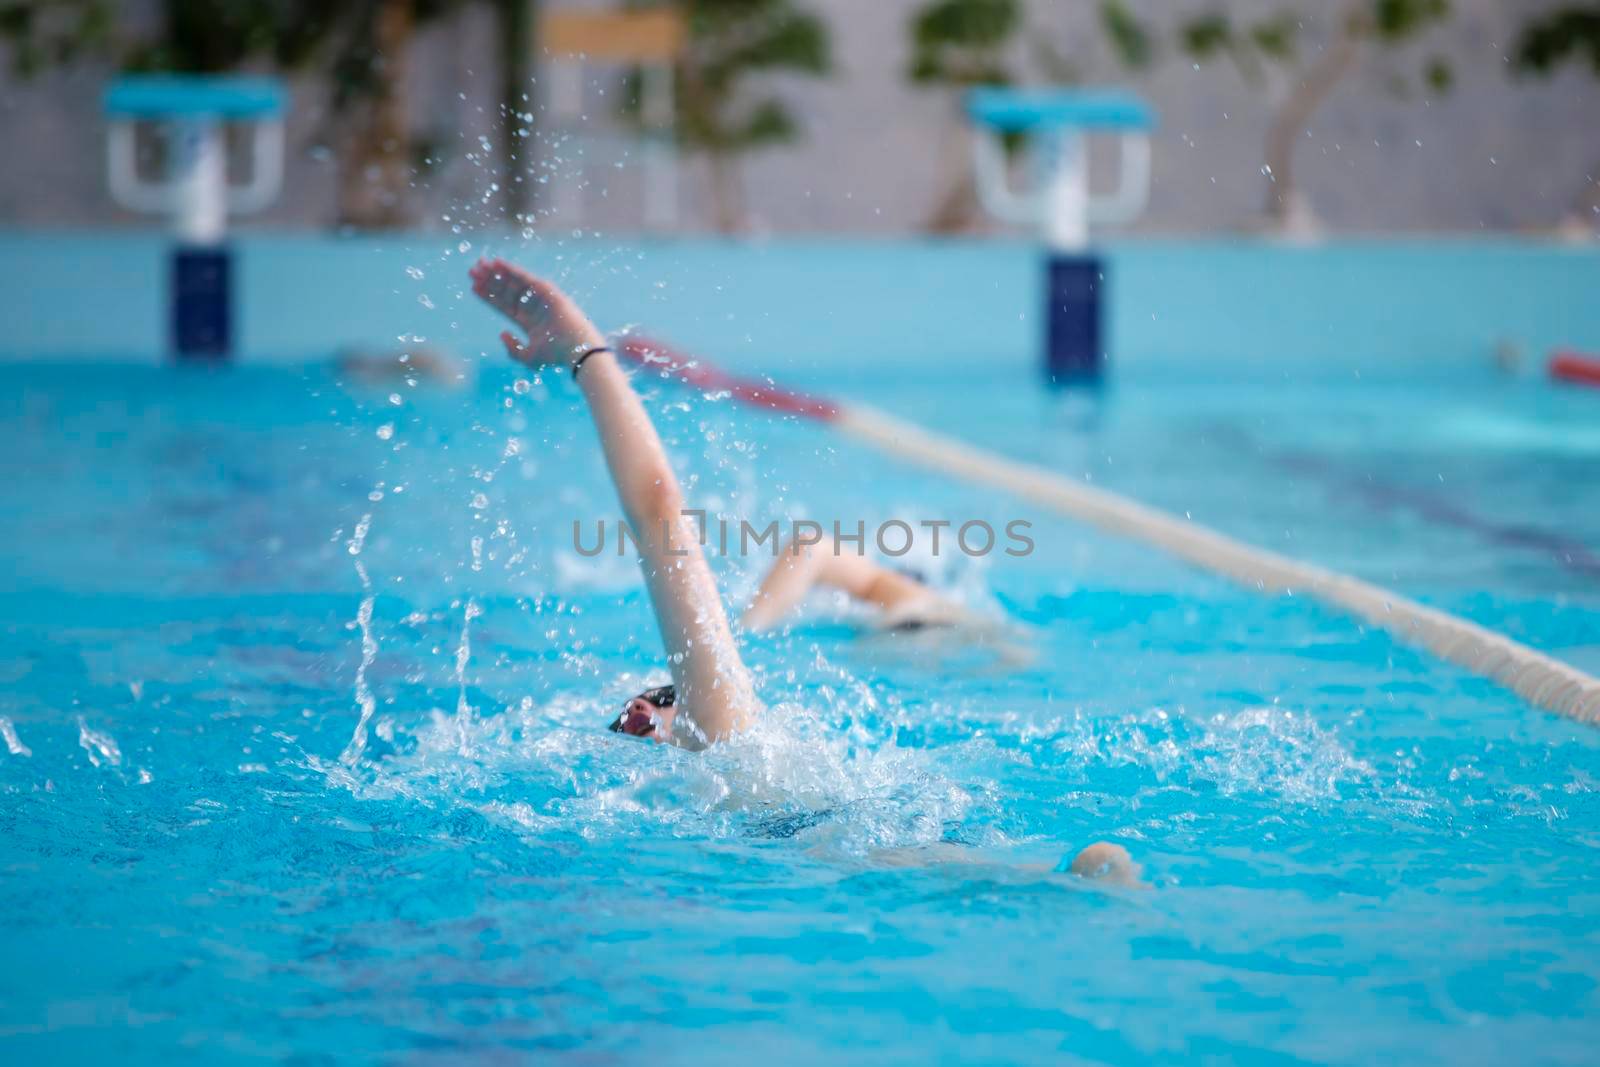 An athlete is swimming in the sports pool.